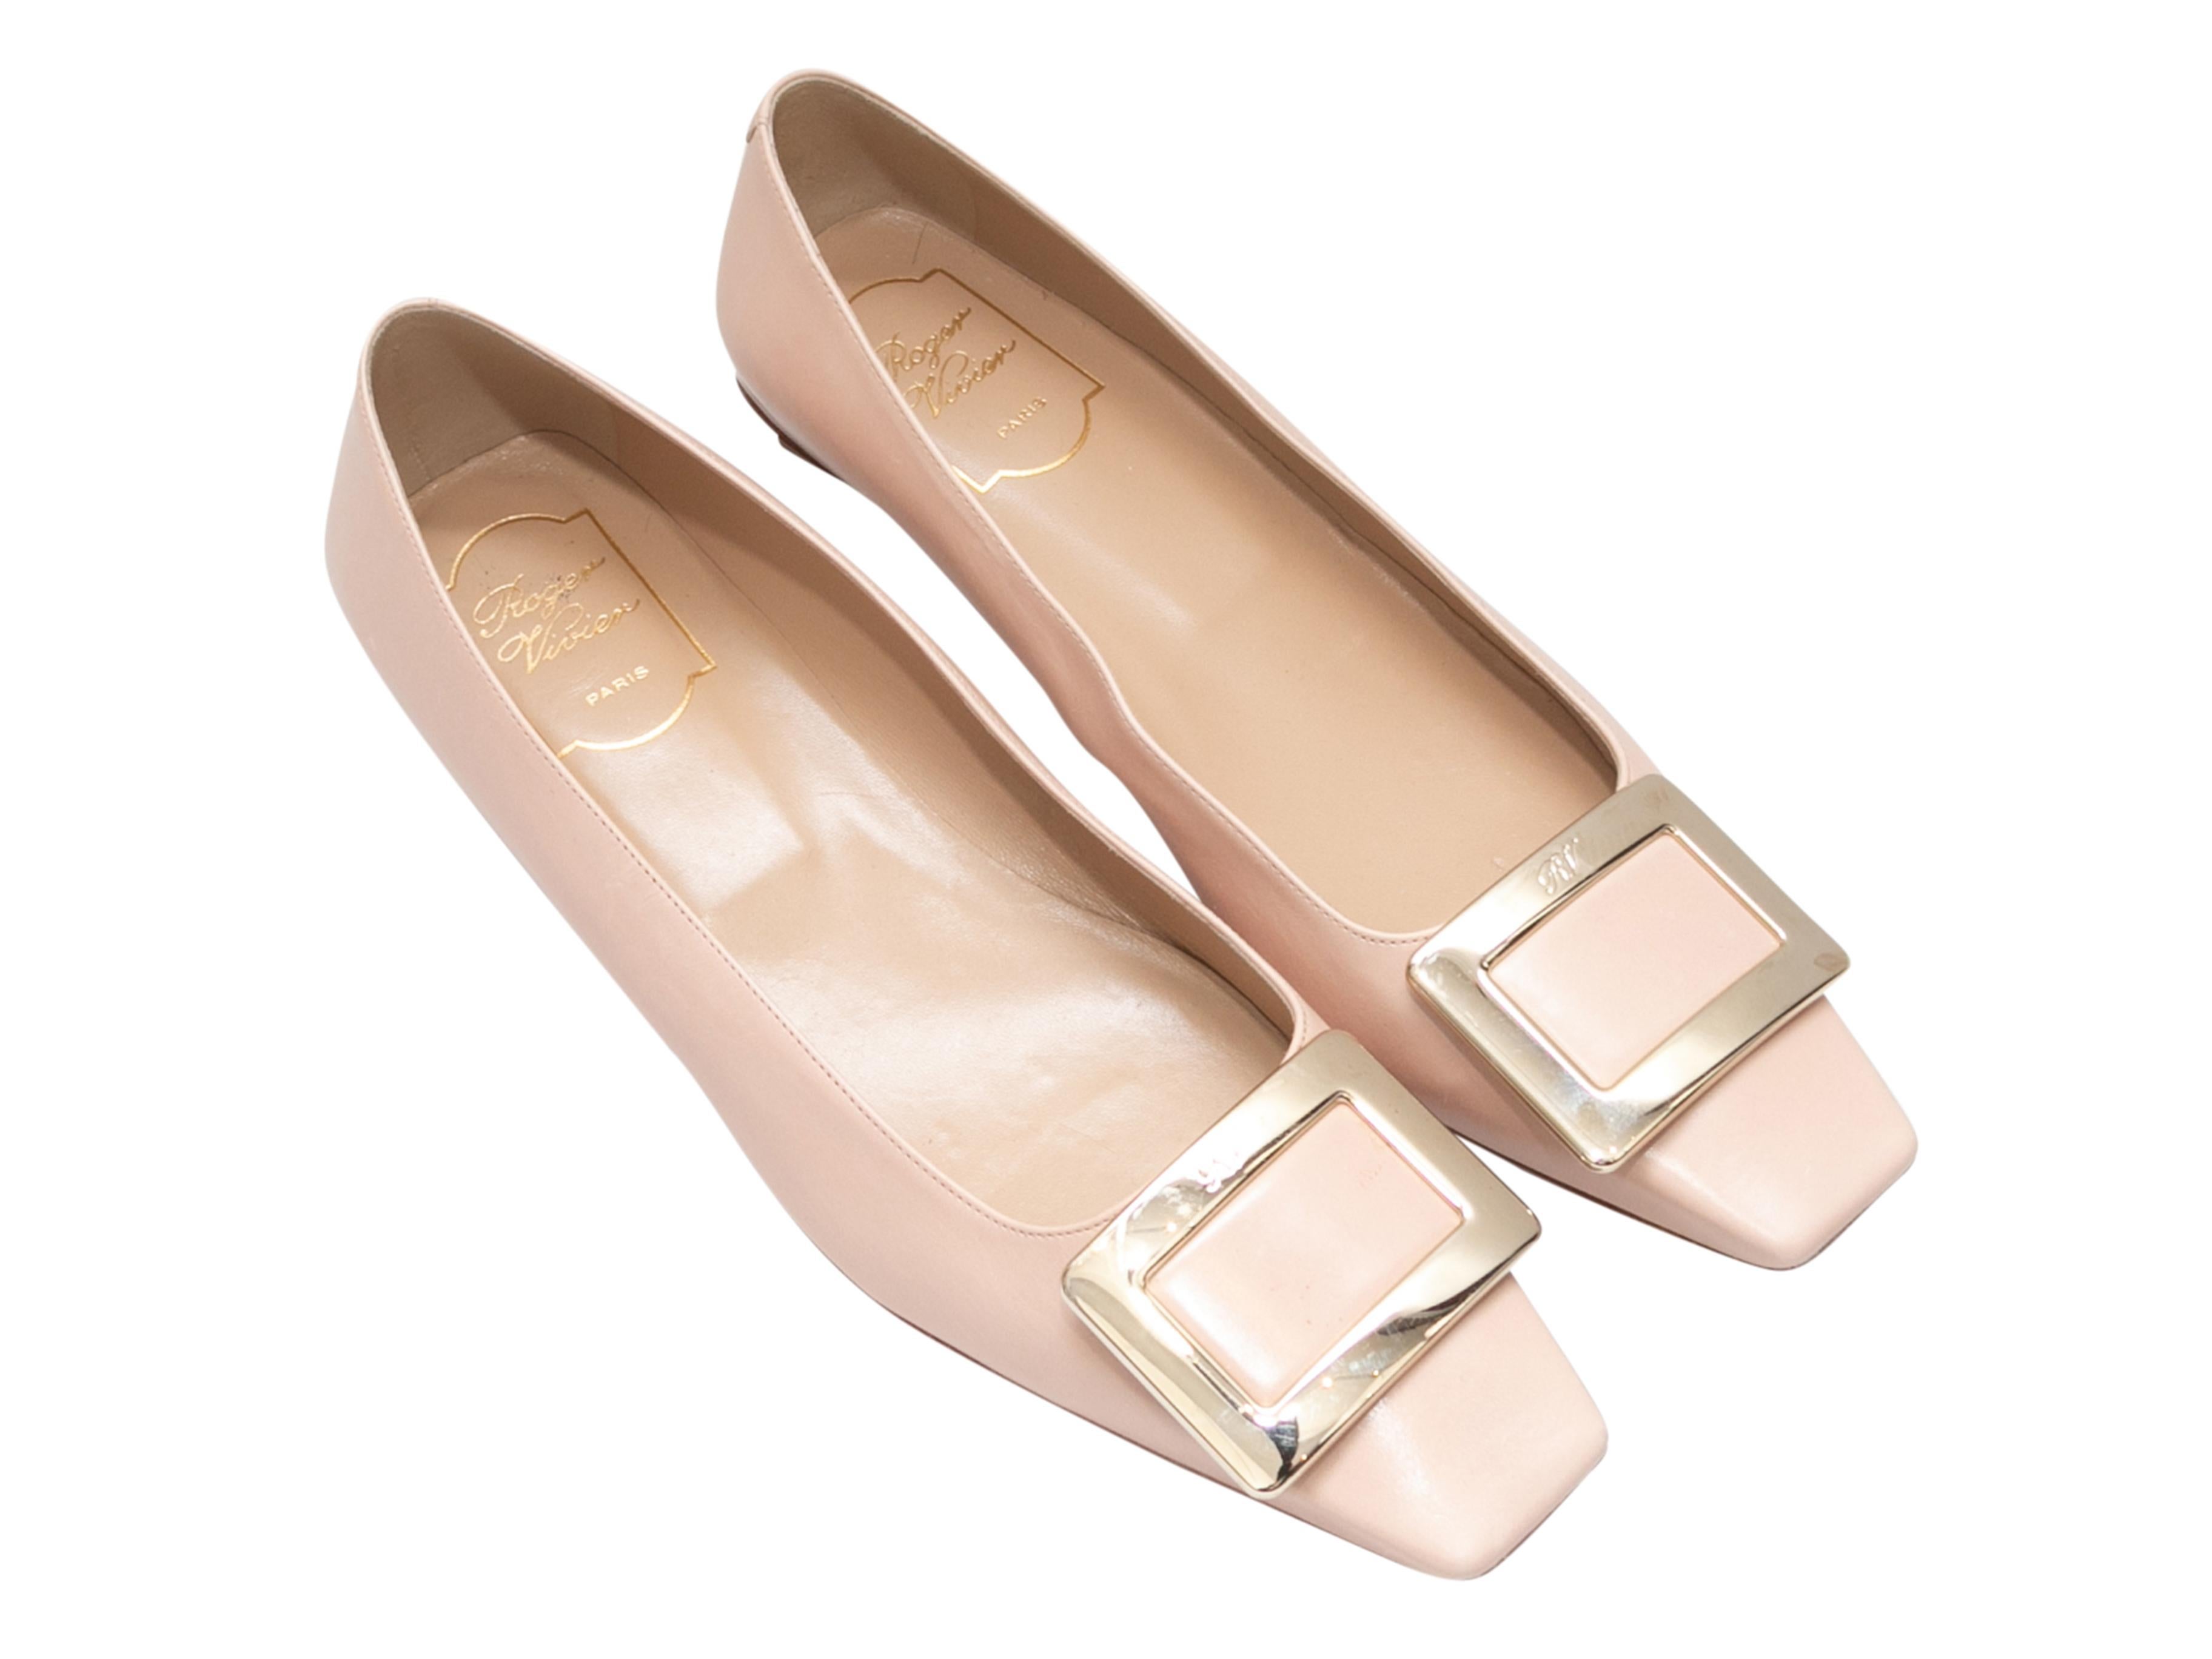 Beige patent leather square-toe Belle ballet flats by Roger Vivier. Gold-tone buckle accents at tops. 0.75